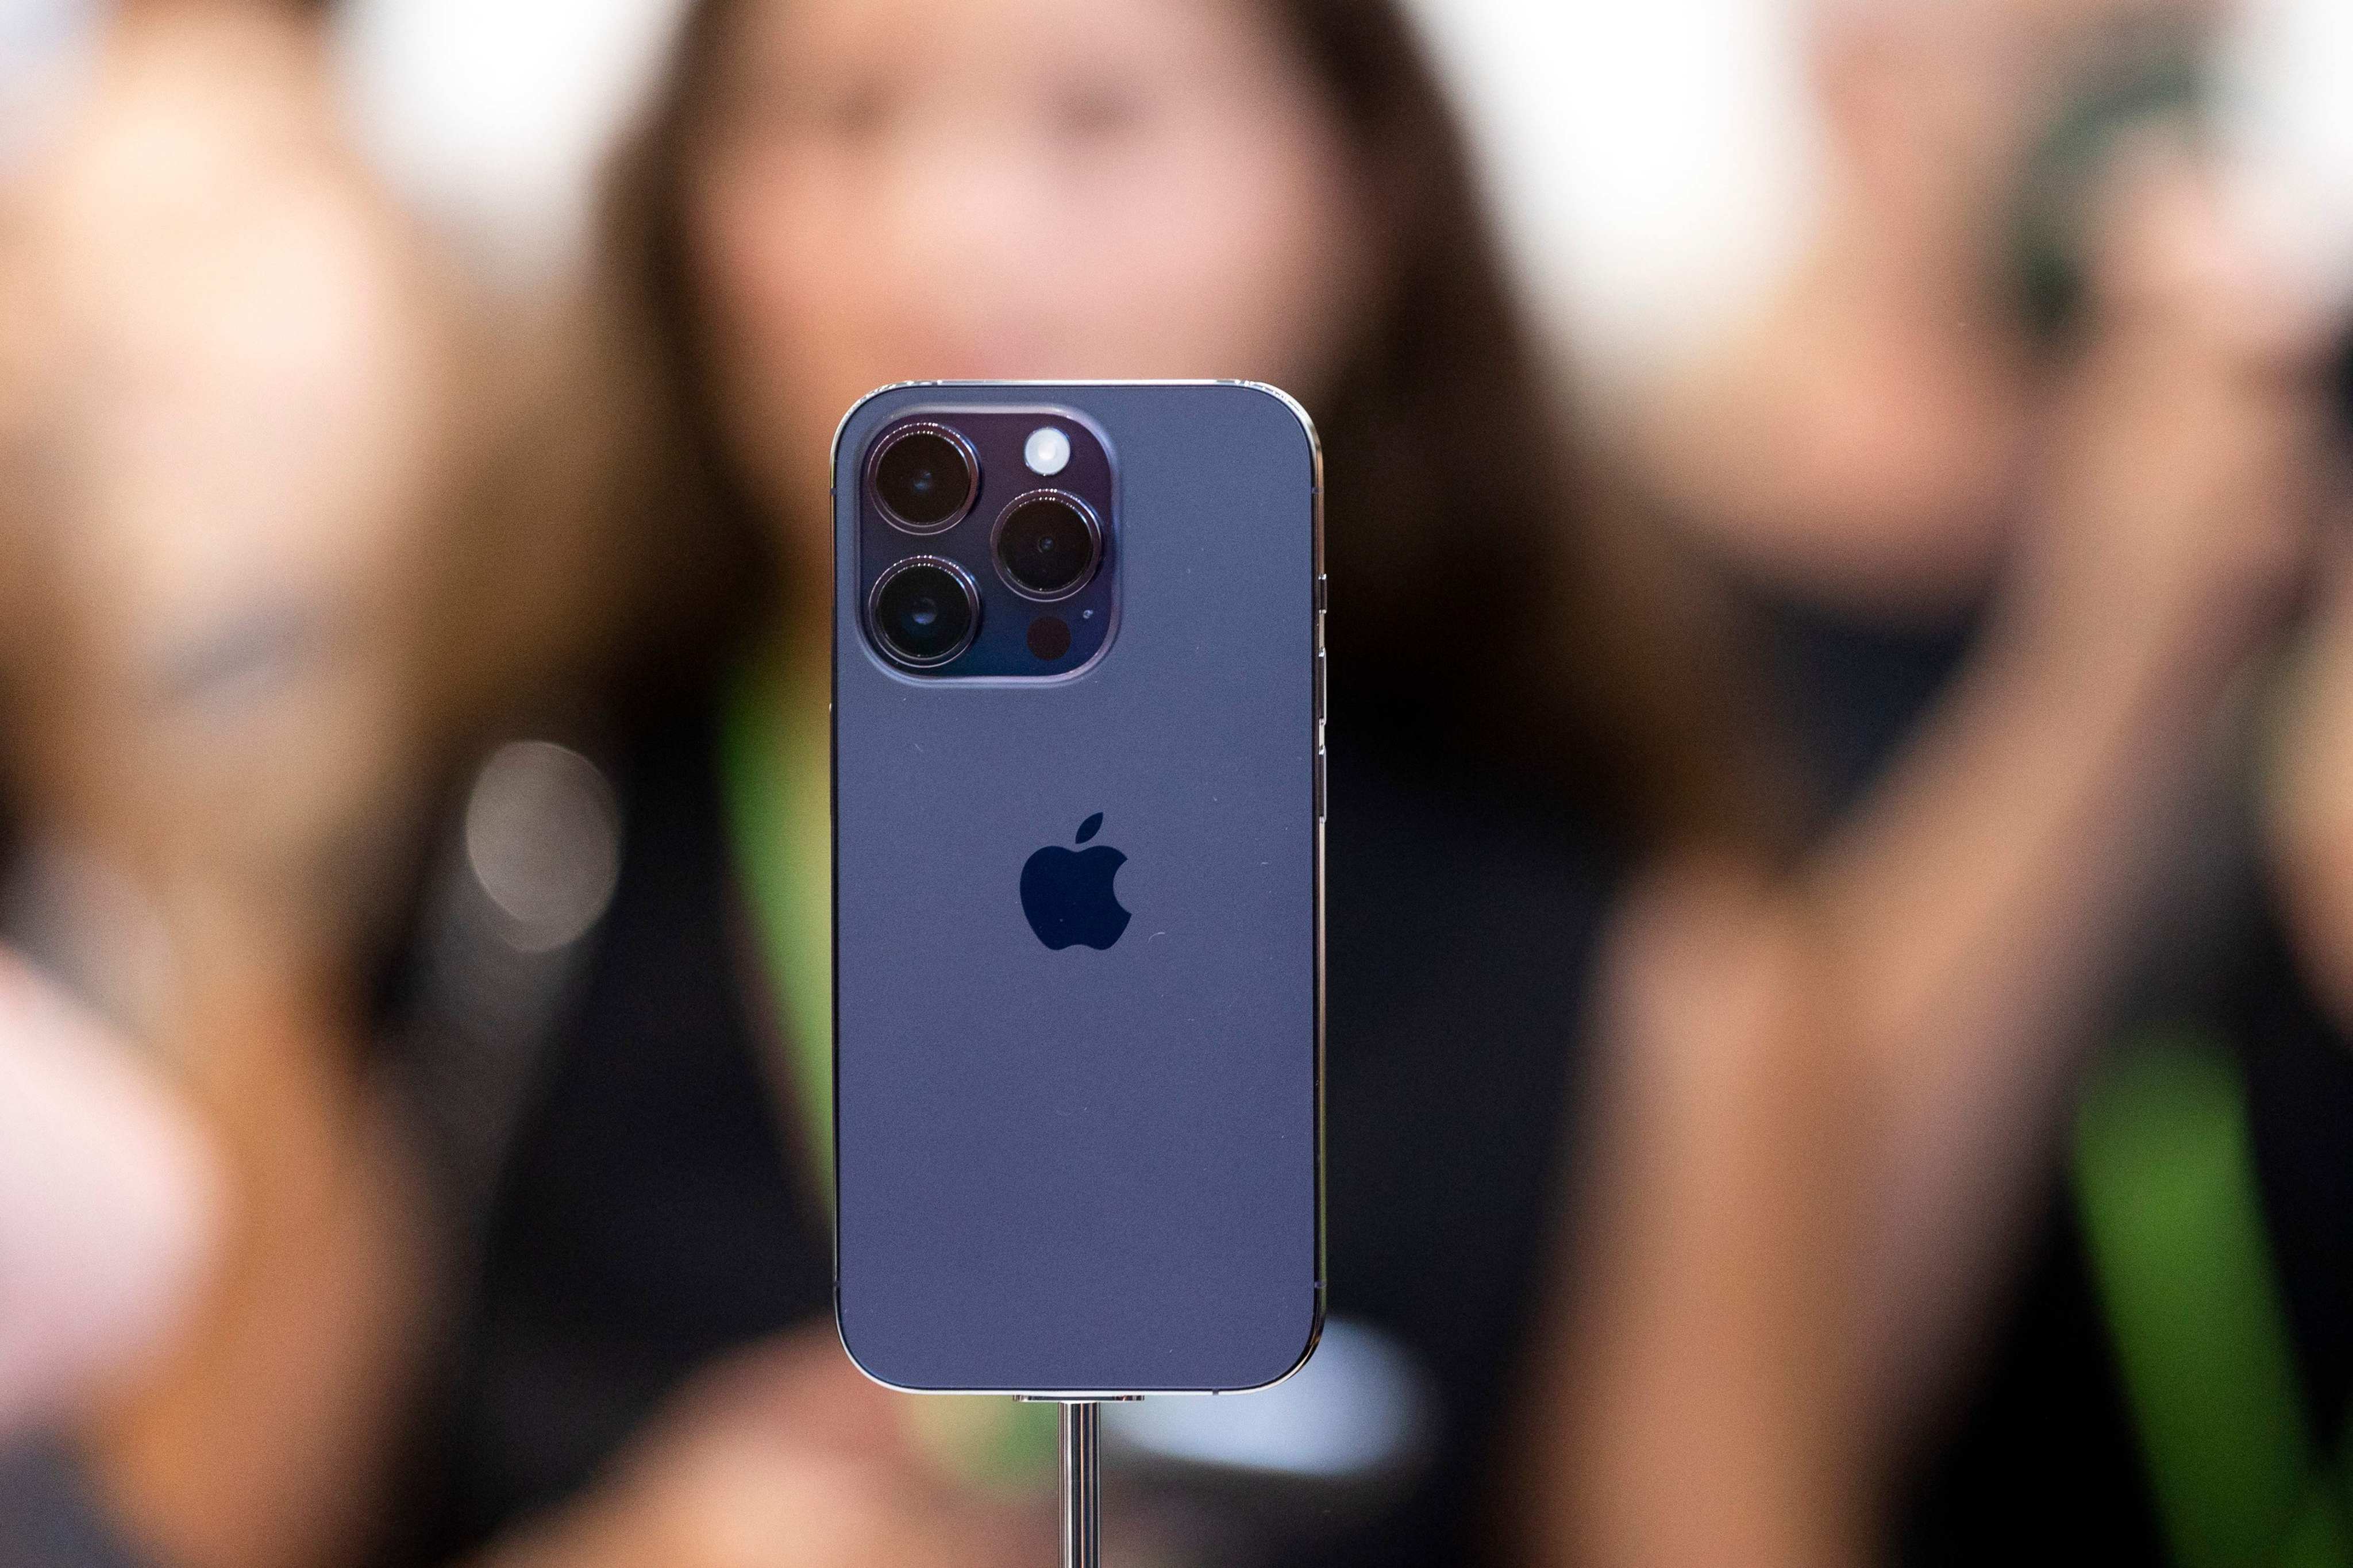 The iPhone 14 Pro displayed during a launch event at Apple Park in Cupertino, California, on September 7, 2022. Photo: Agence France-Presse